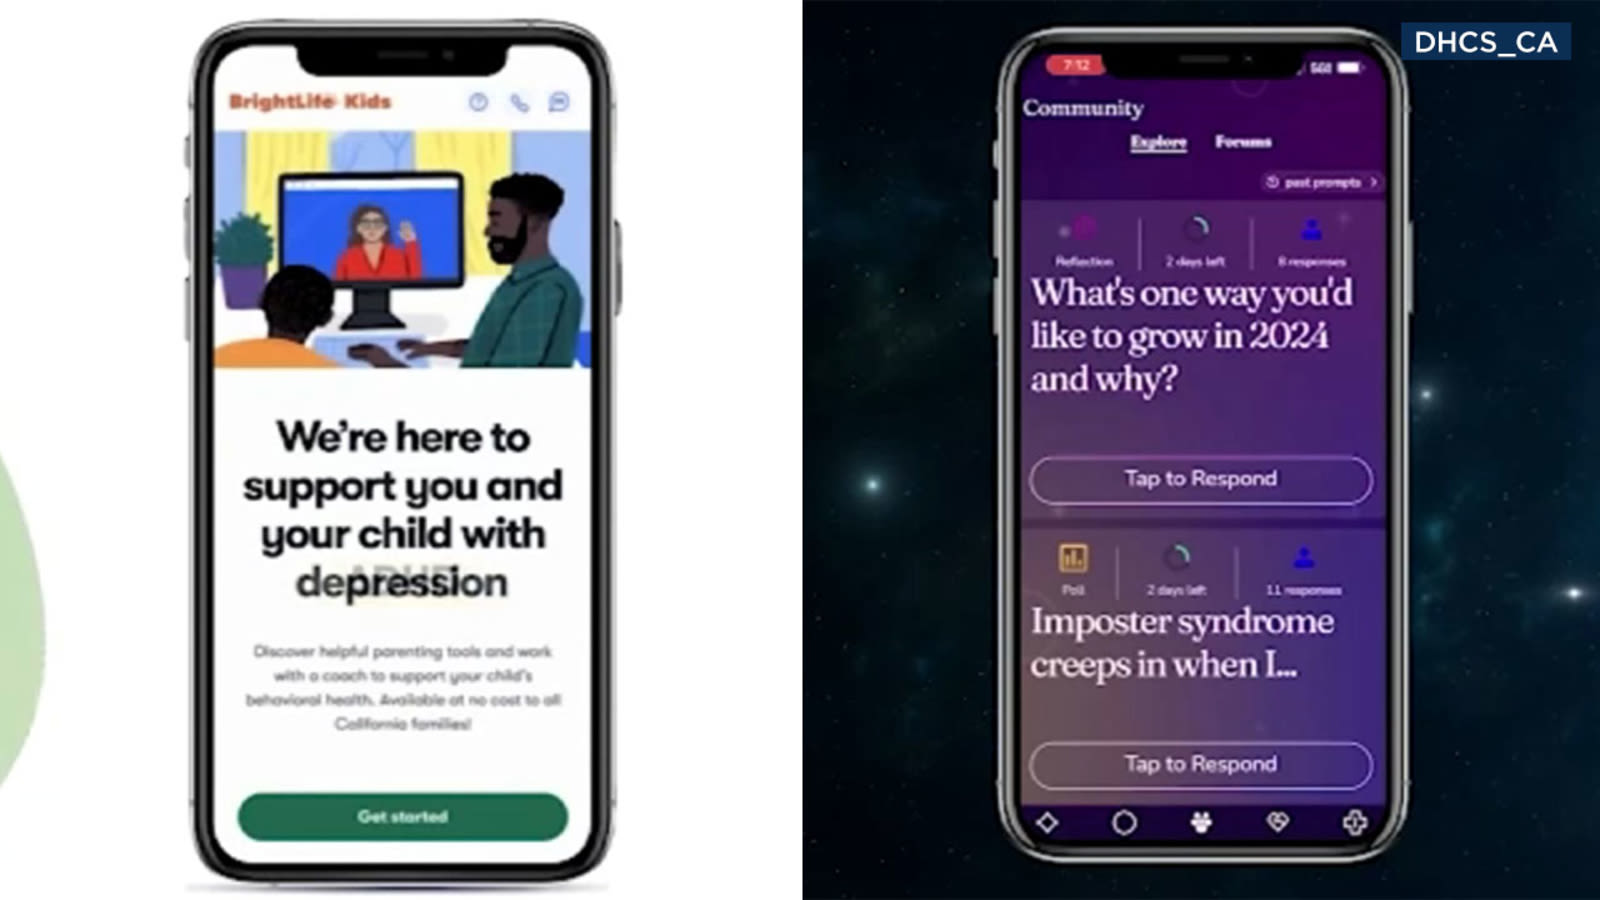 Free mental health apps provide 24/7 help for teens and young children across California